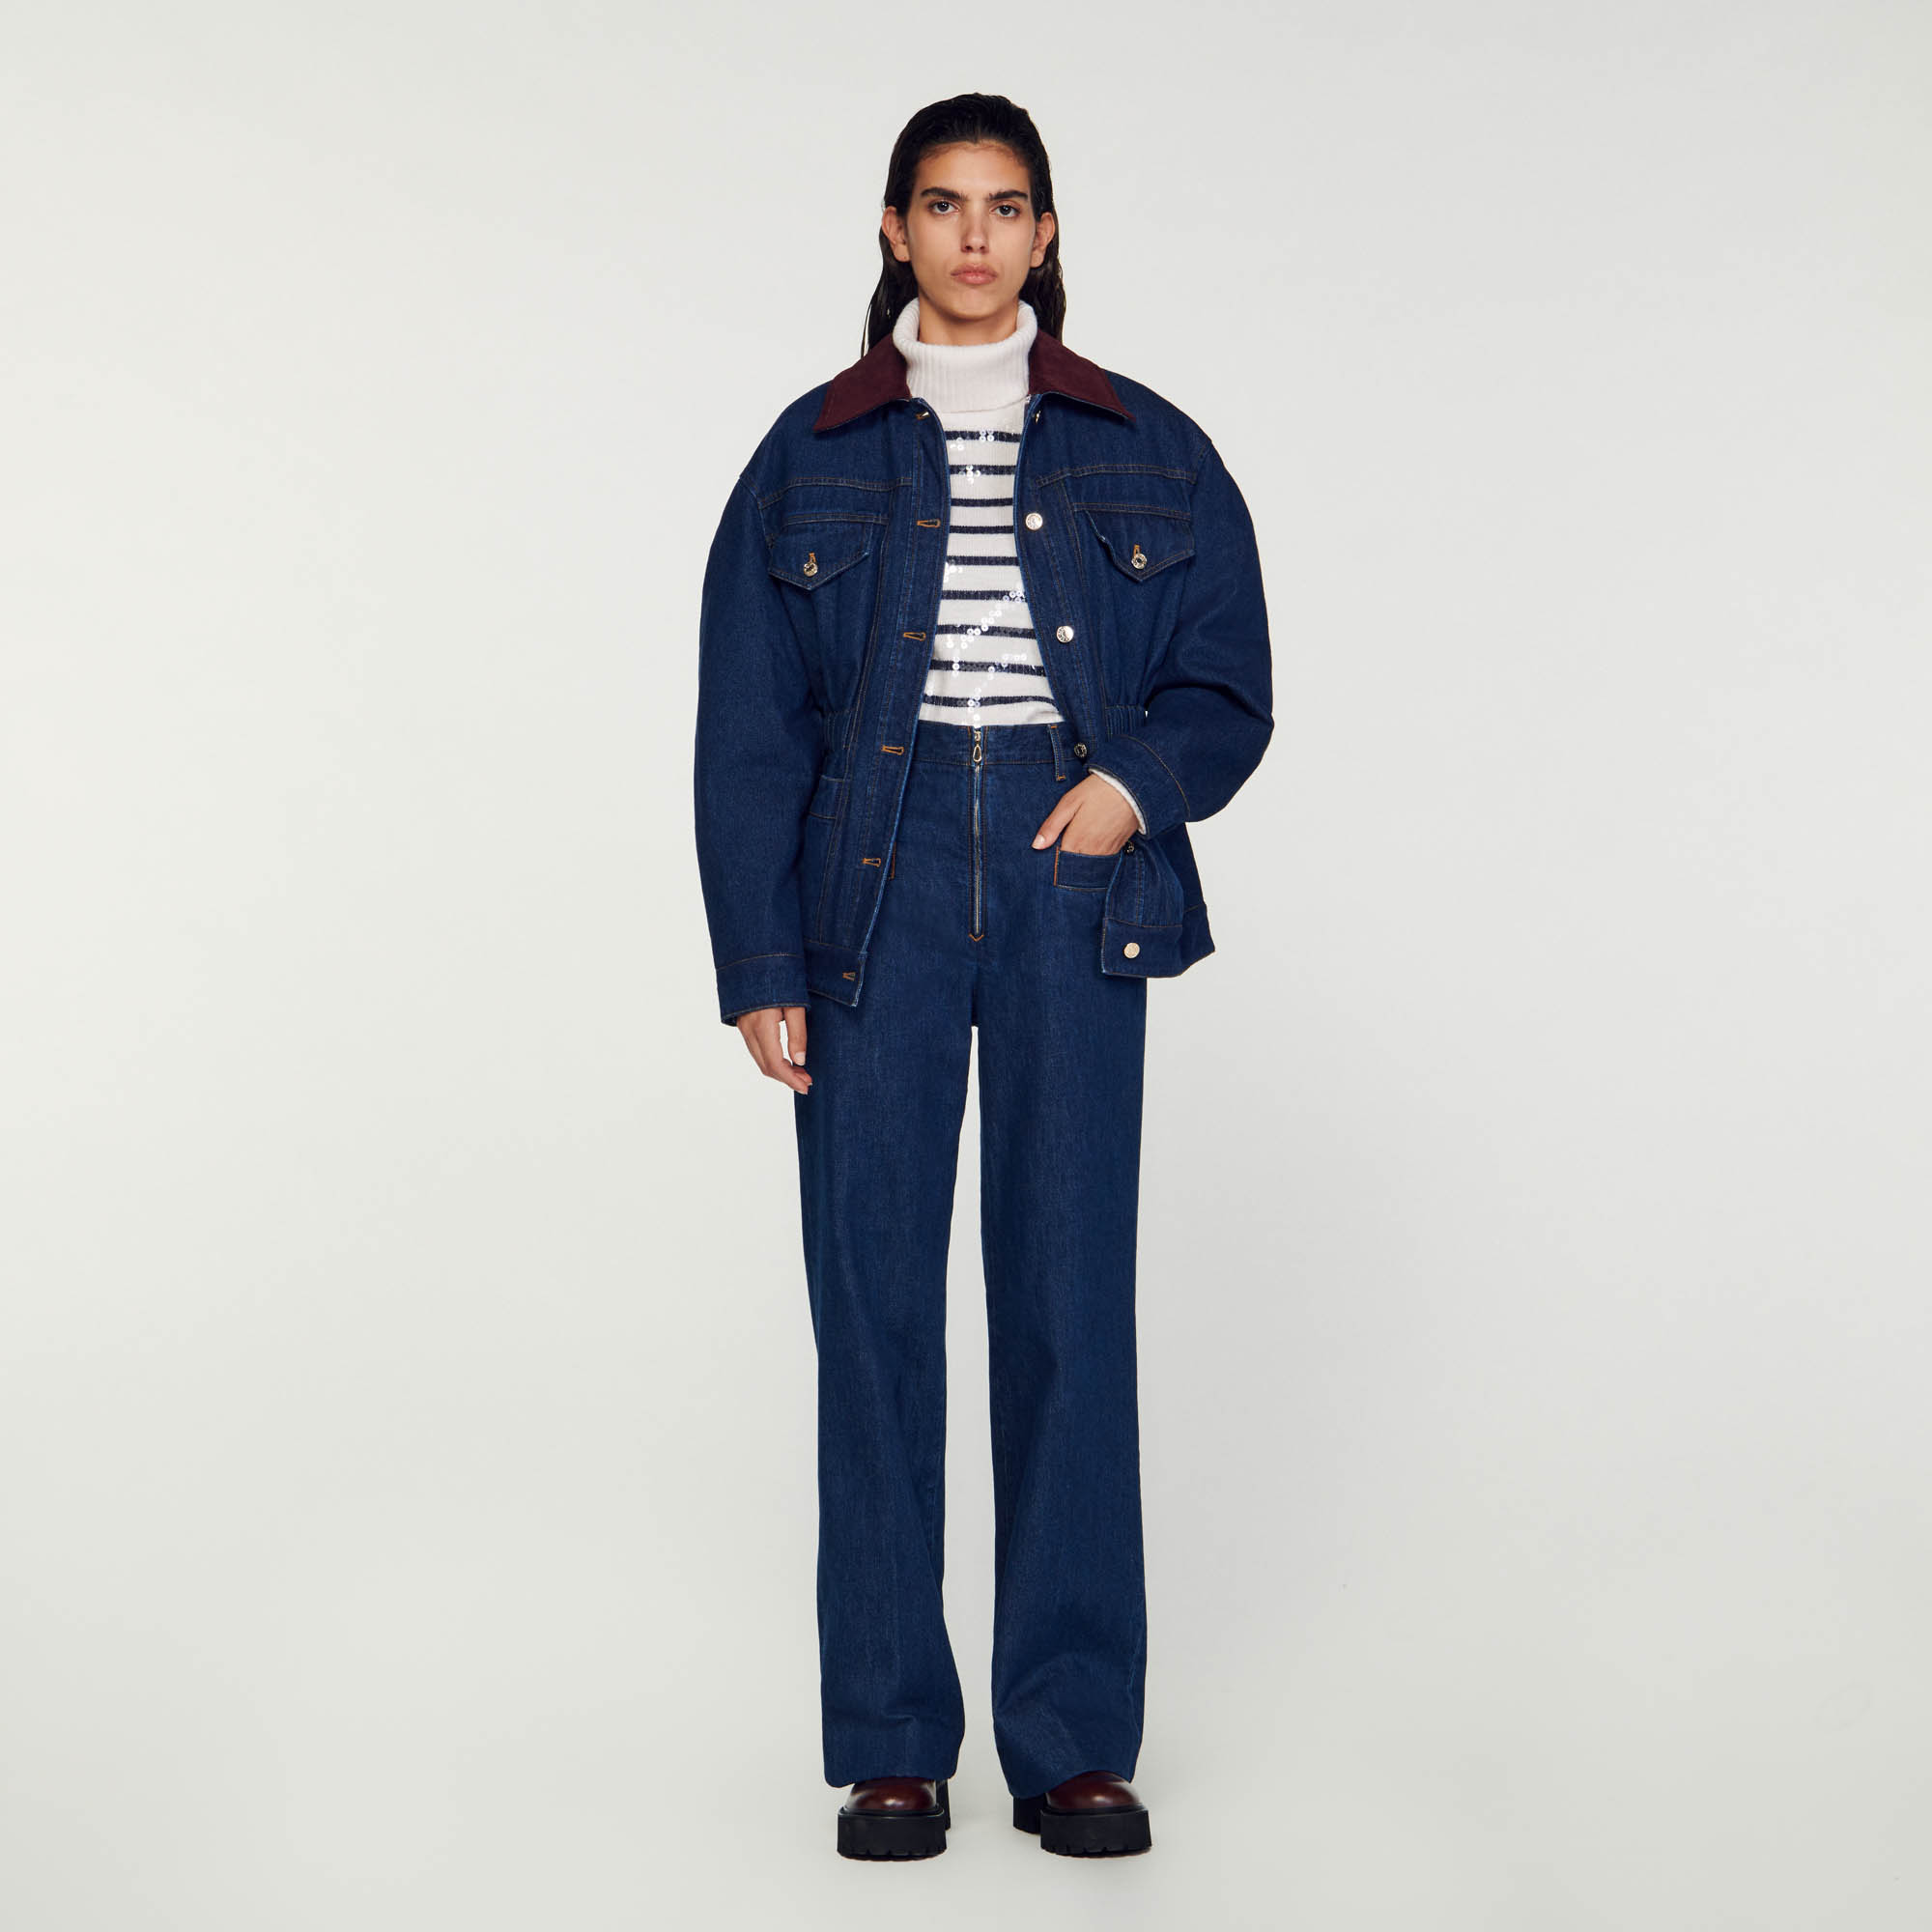 Sandro cotton Lining: High-waisted raw denim jeans with wide legs, belt loops, zip fastening and large welt pockets at front